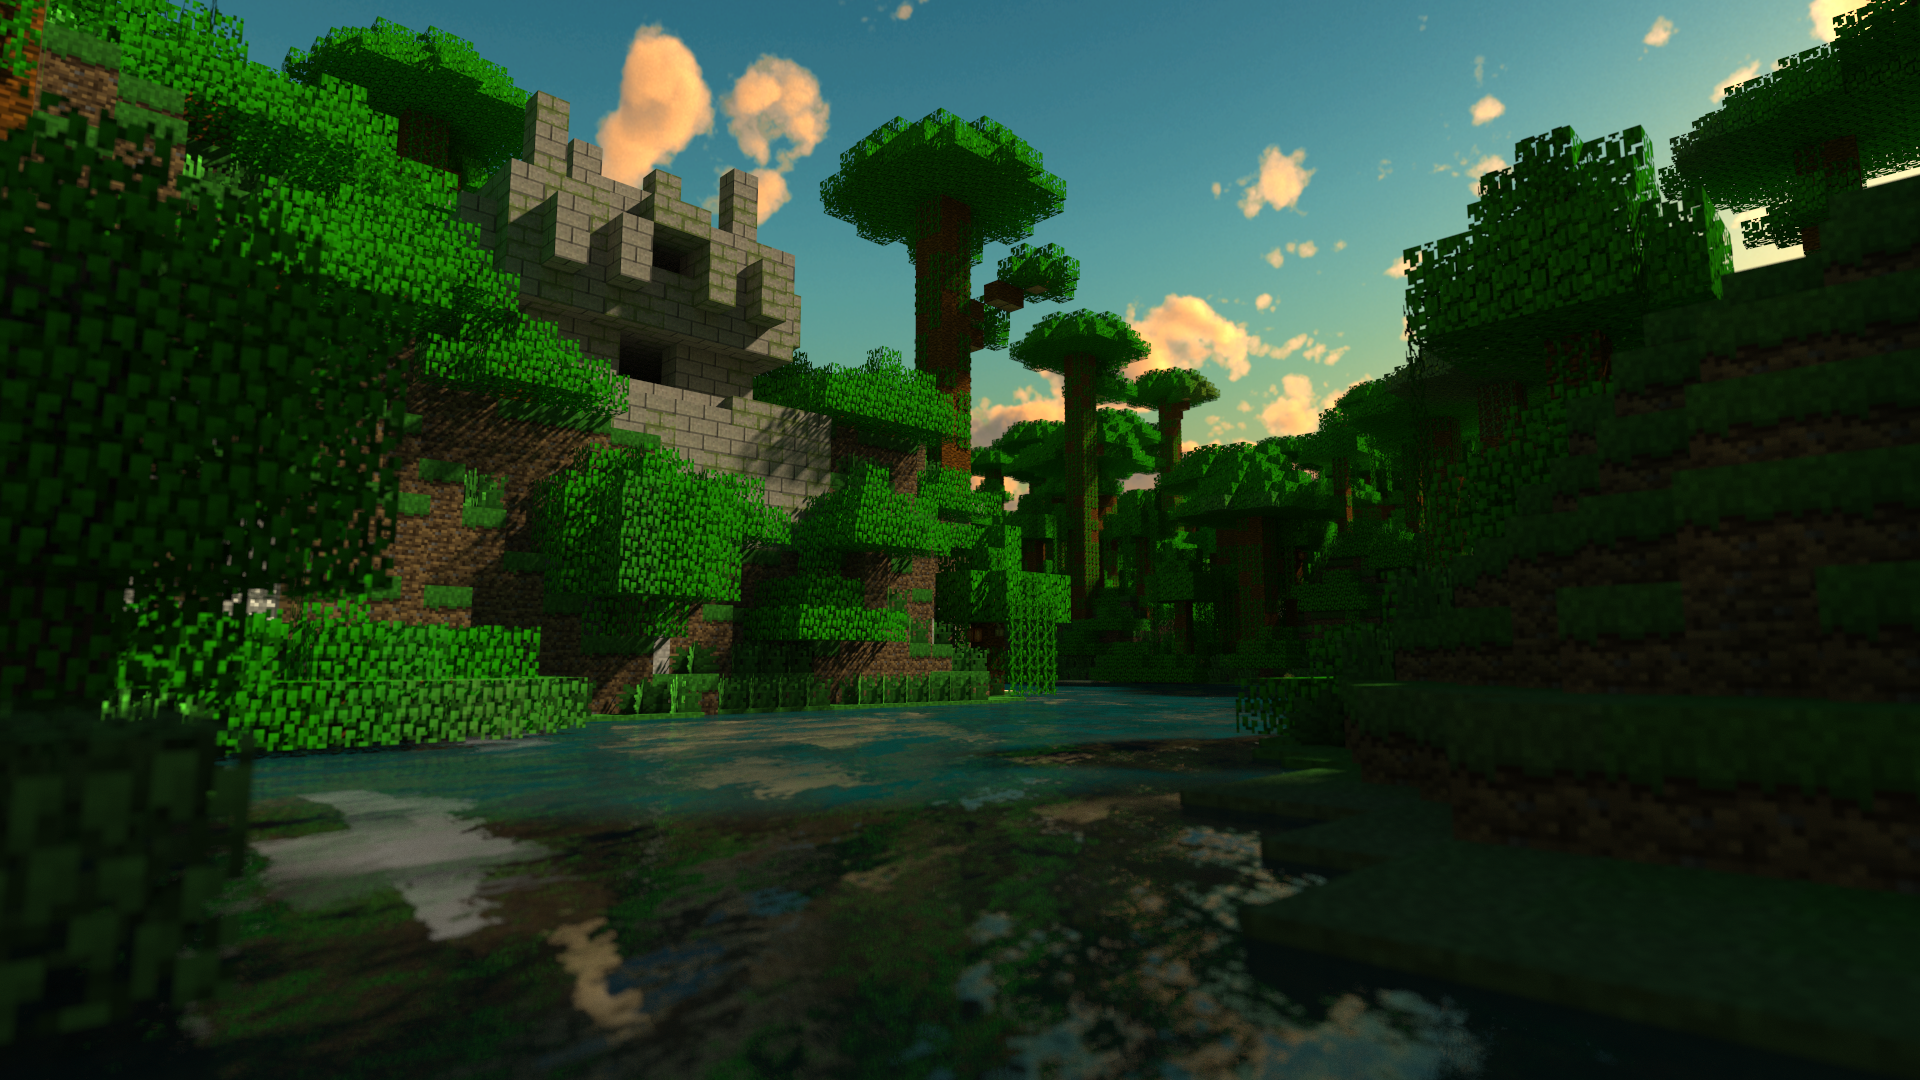 Cool HD Jungle Background Render Made With Chunky Minecraft